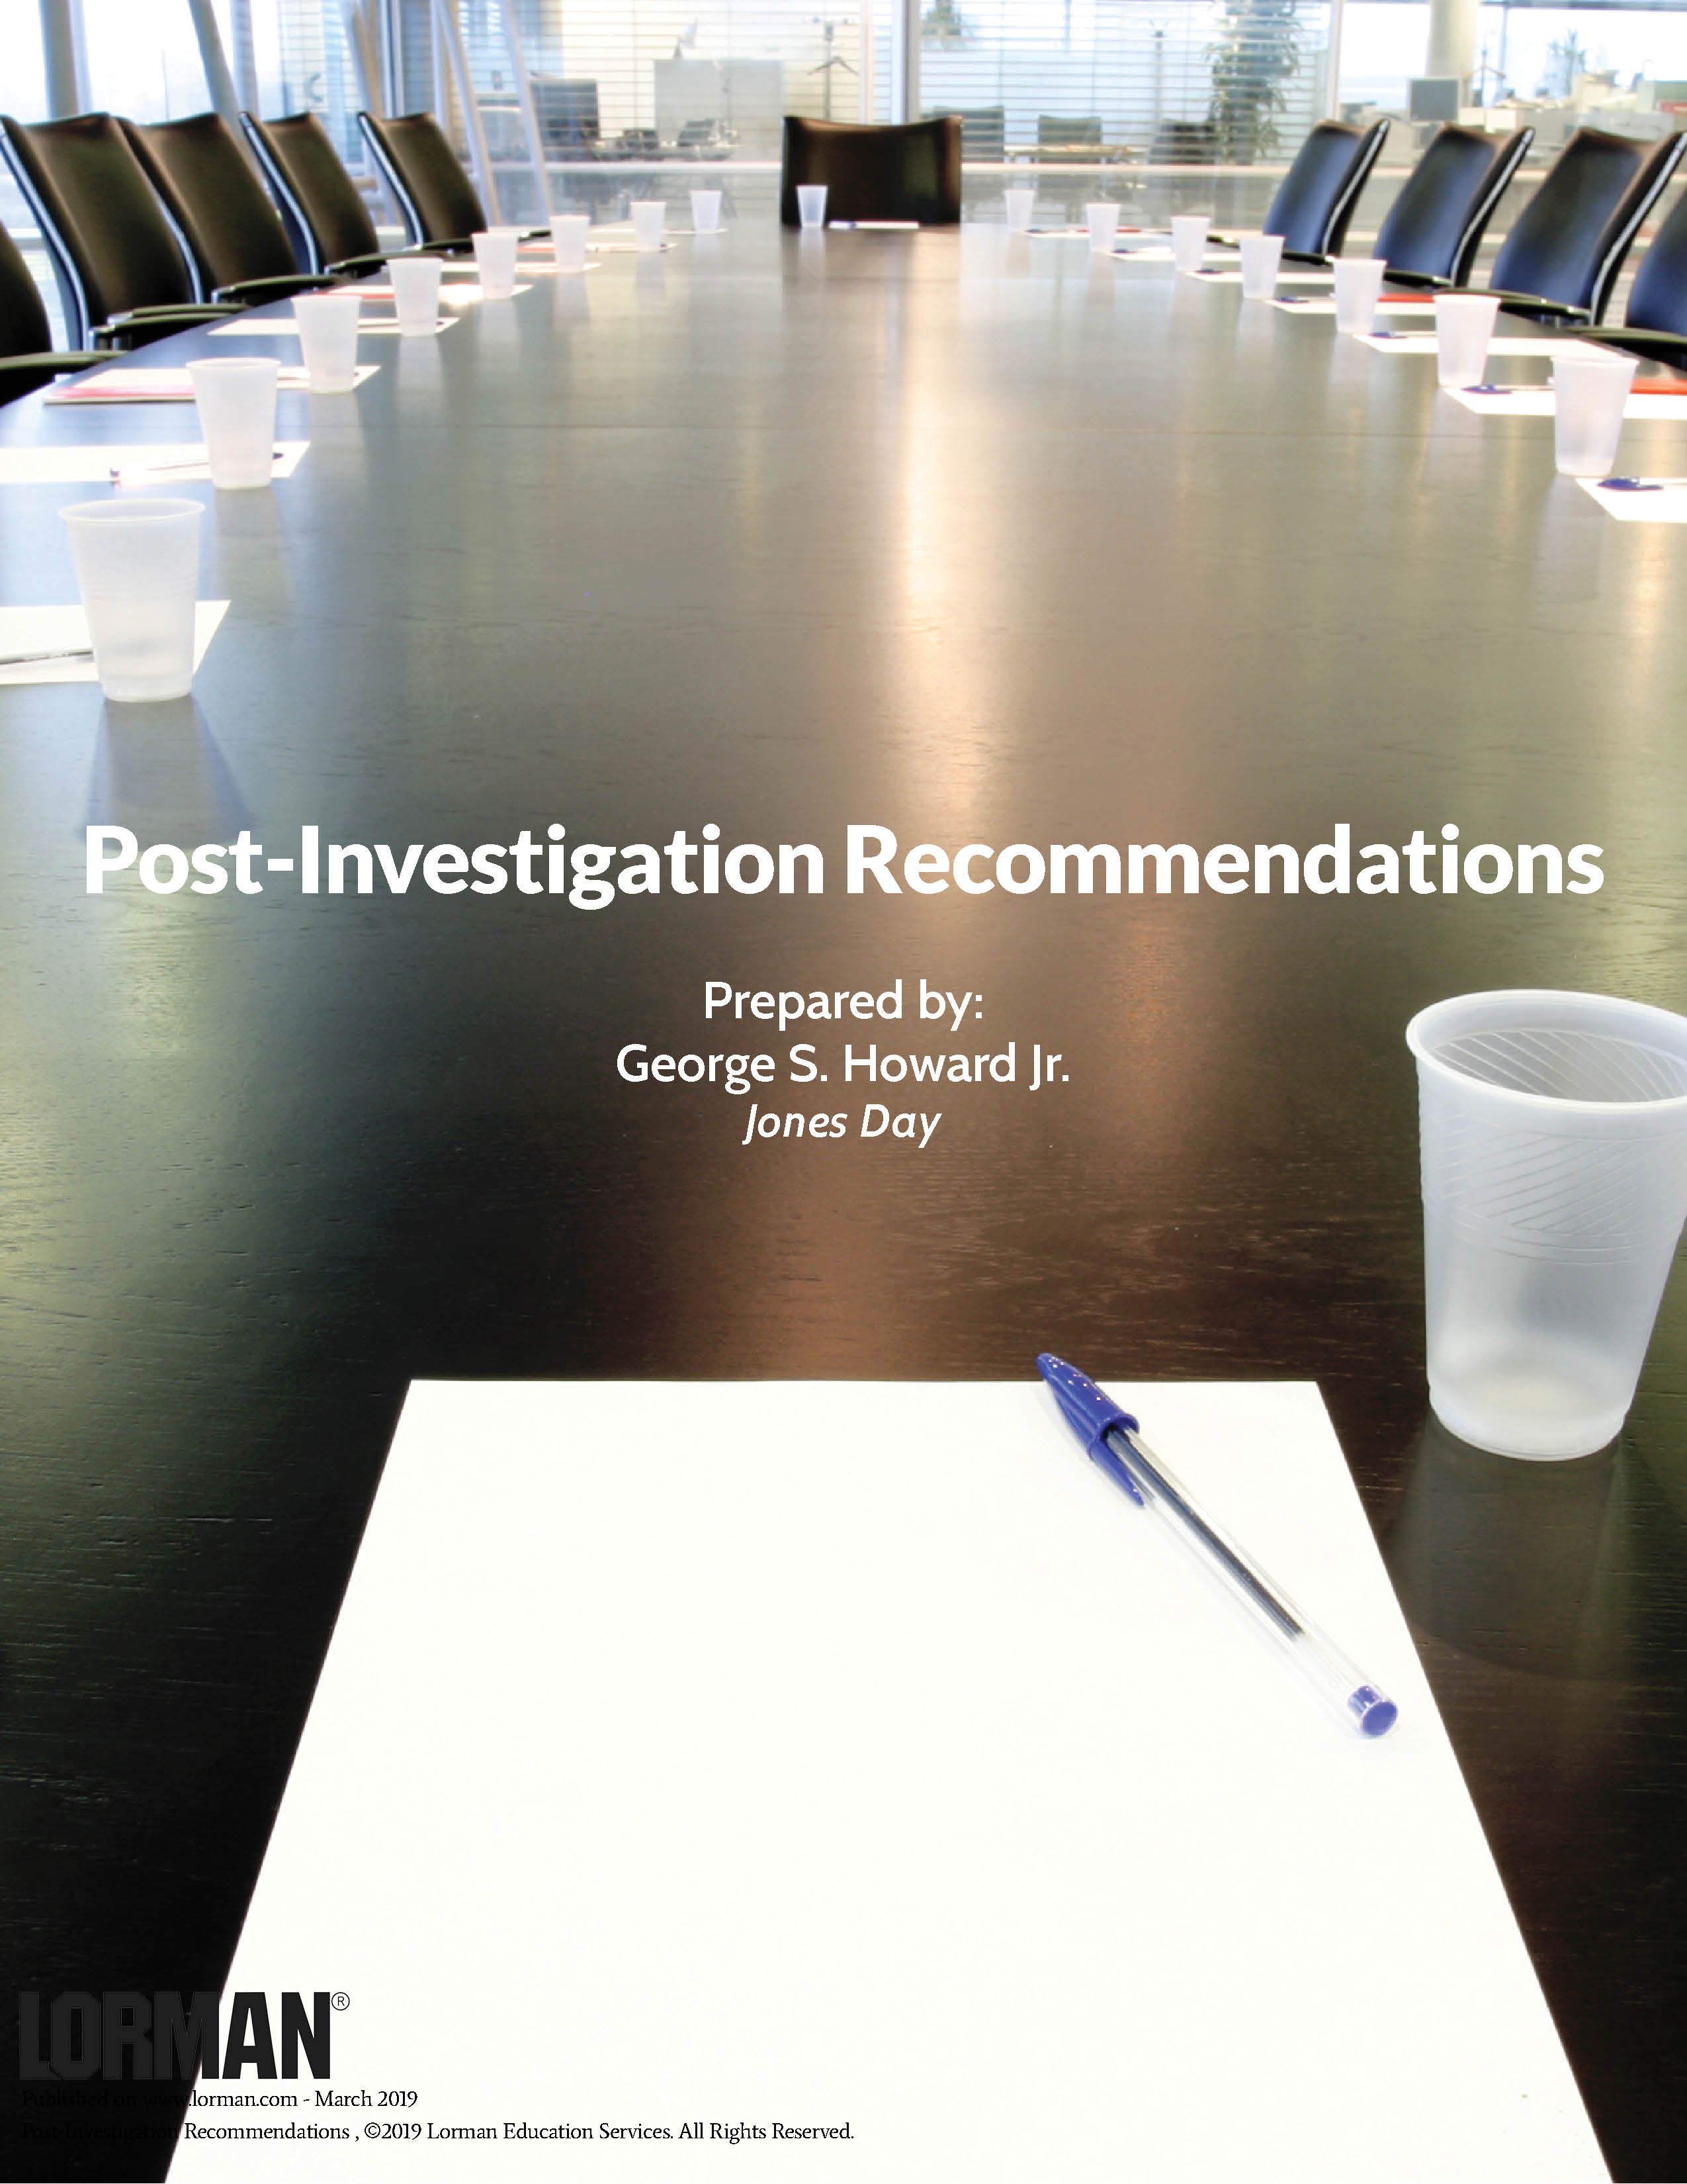 Post-Investigation Recommendations